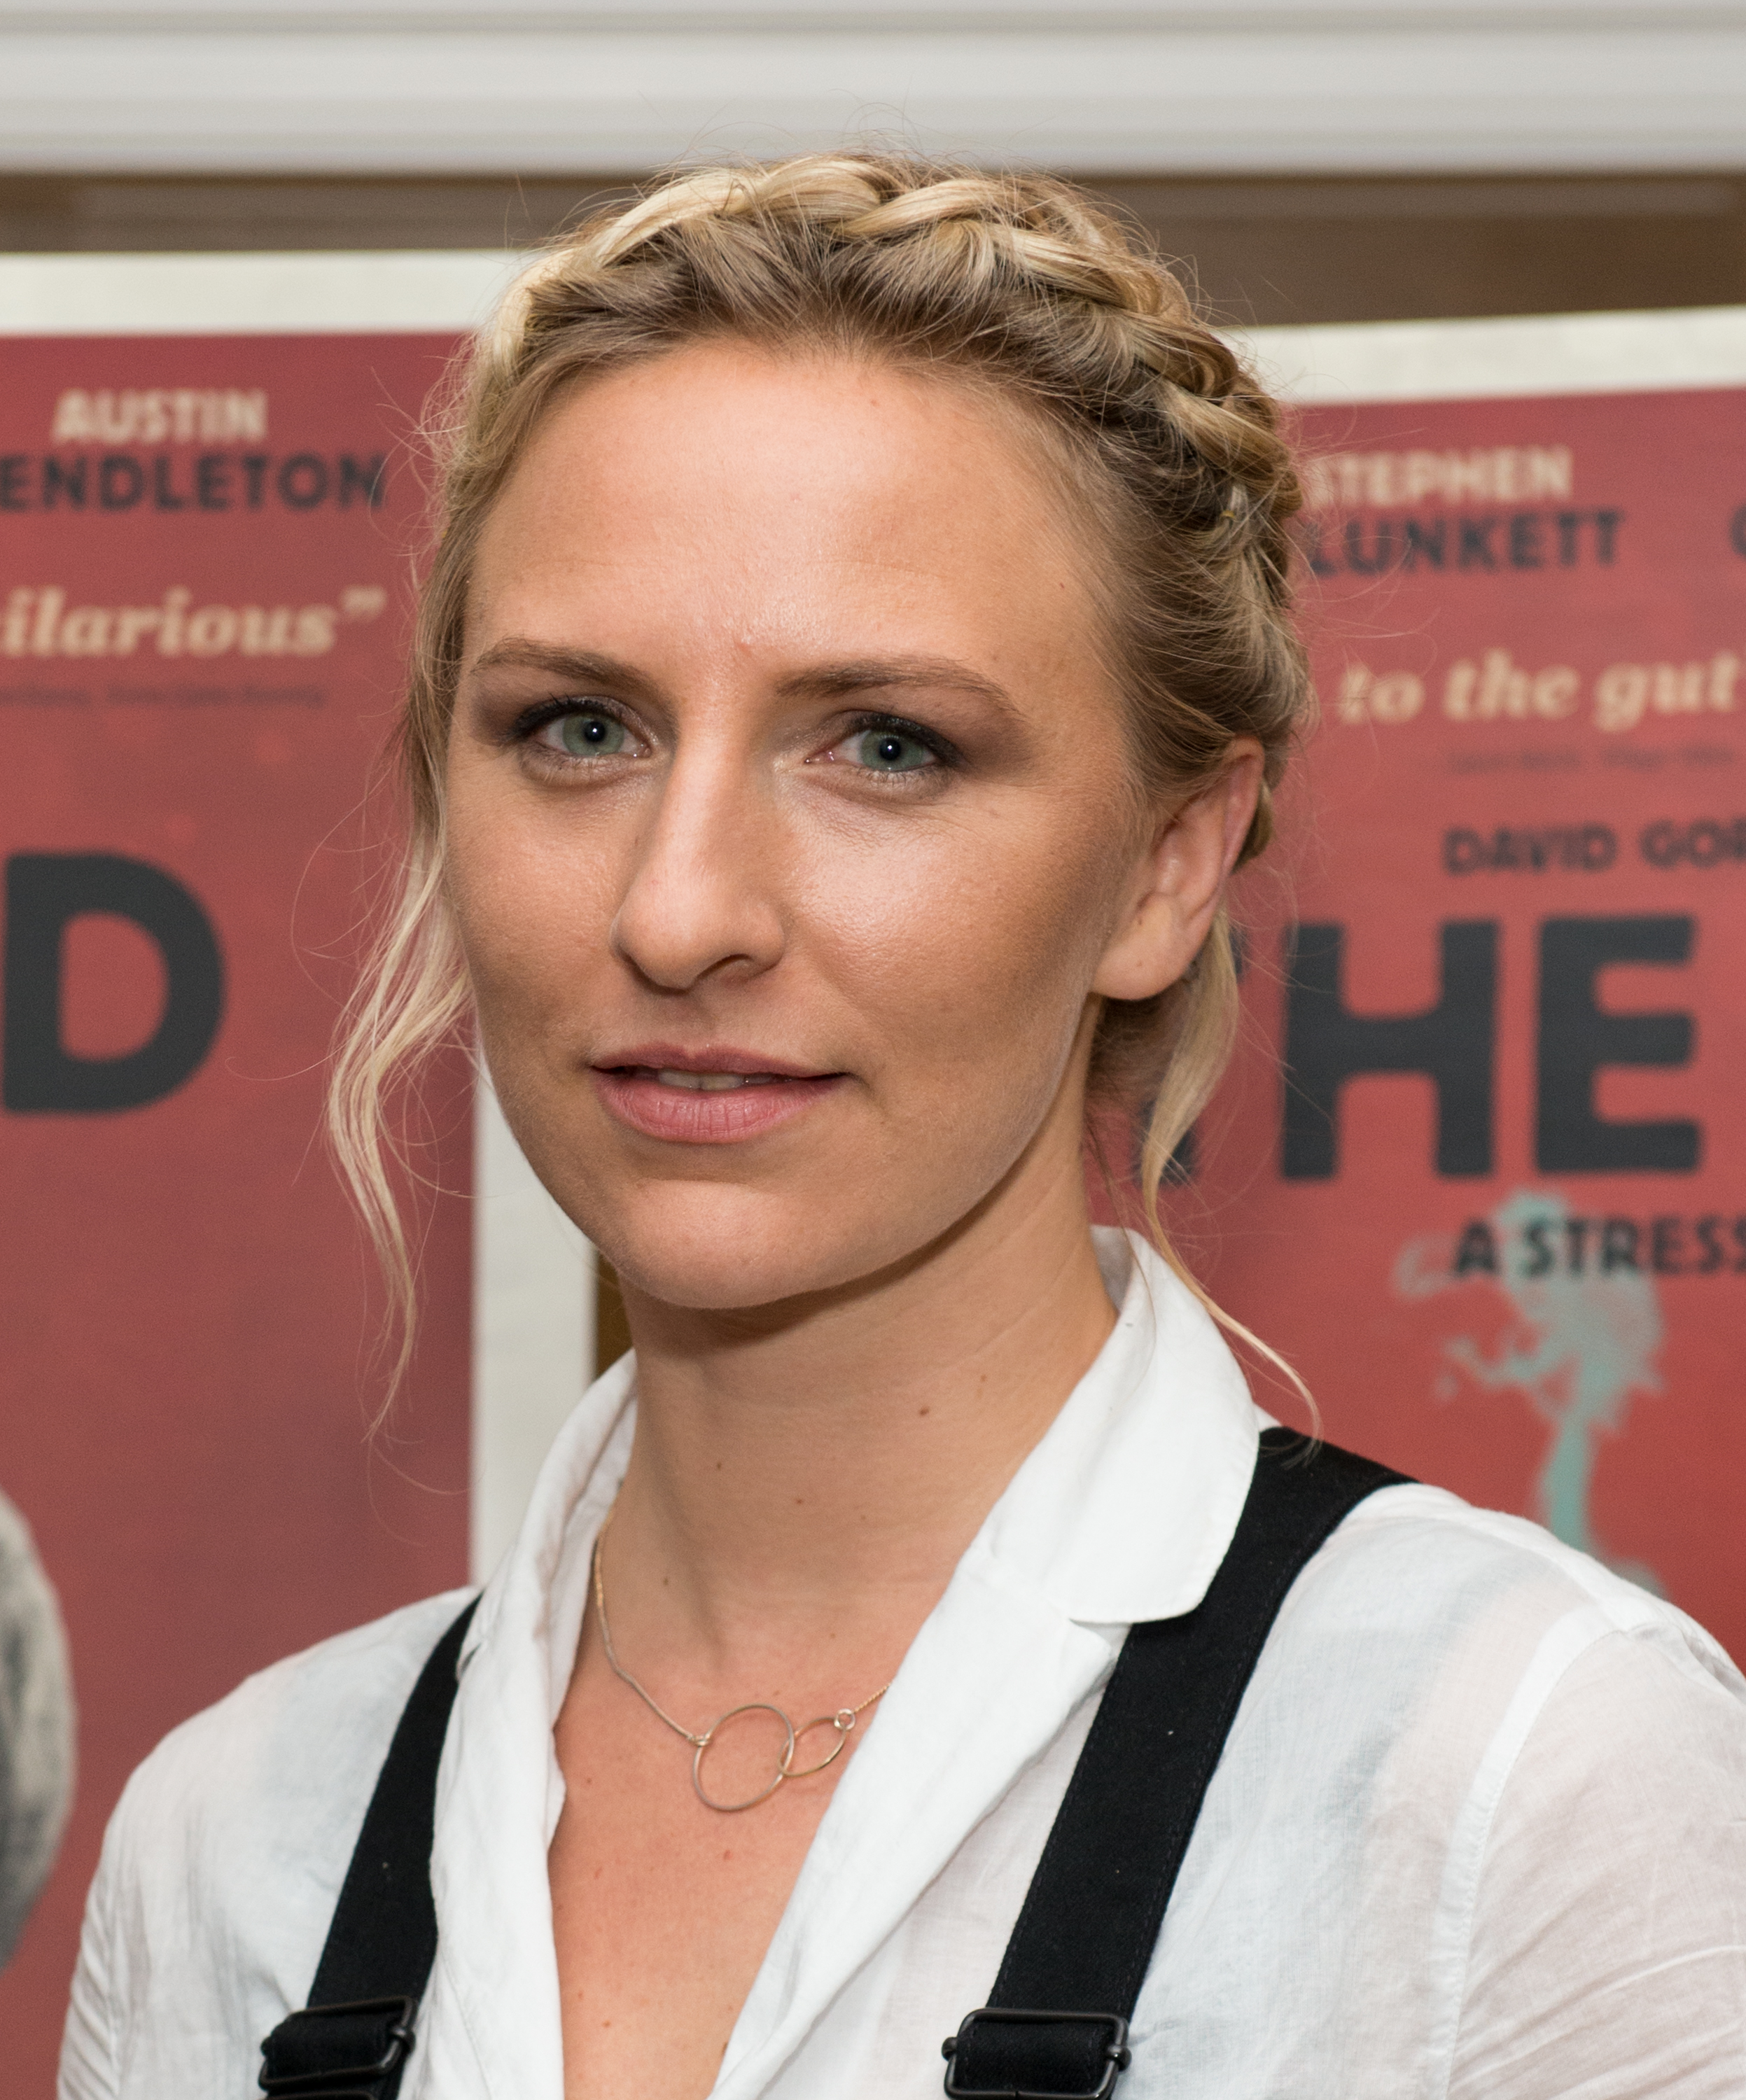 Mickey Sumner attends "The Mend" premiere at Crosby Street Hotel in New York City on August 17, 2015. | Source: Getty Images